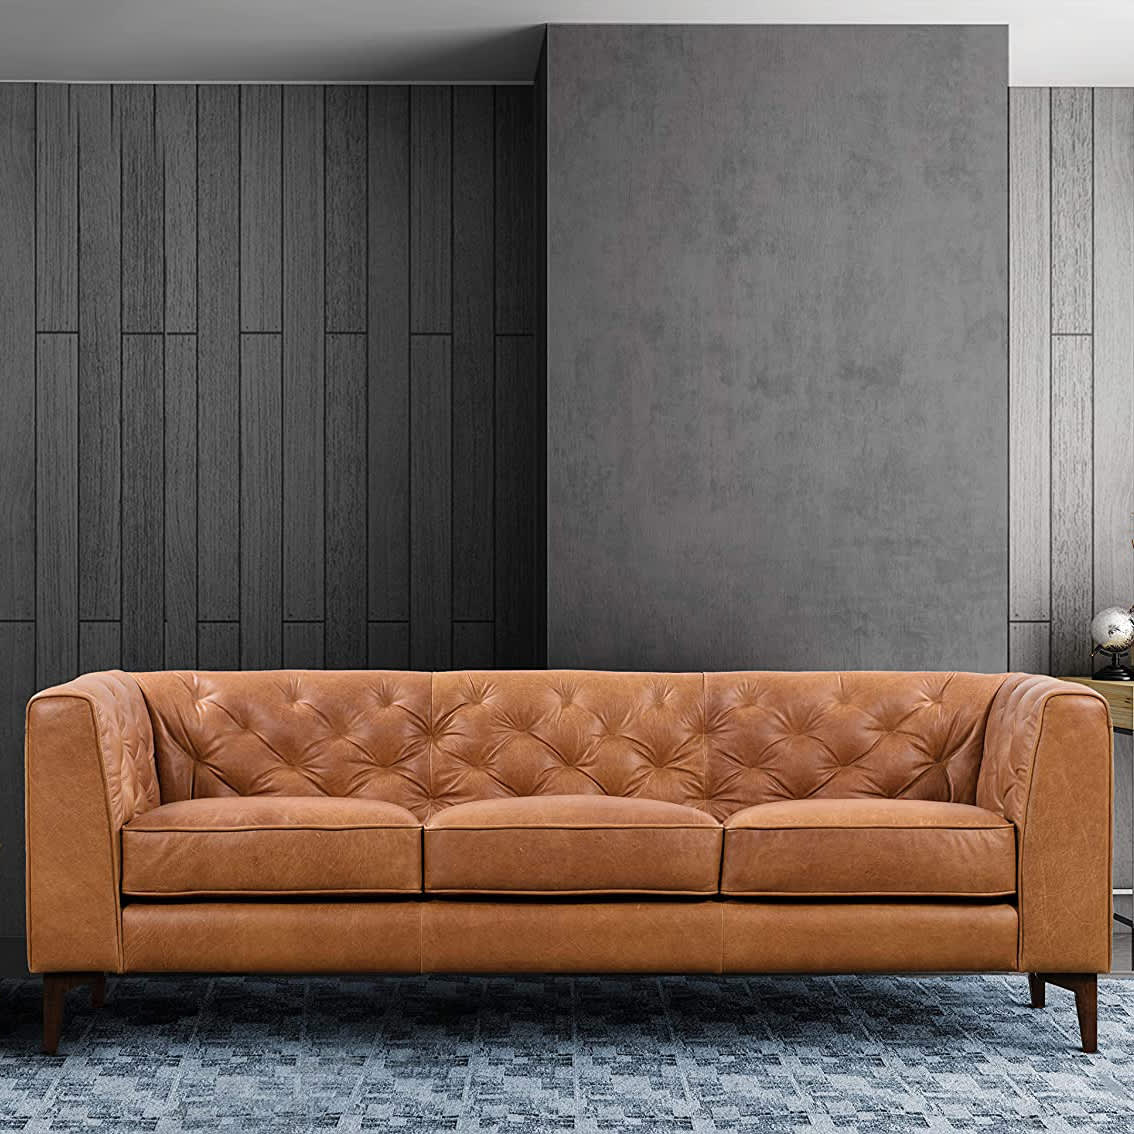 12 Best Amazon Sofas for 2023 (Modern, Leather, Velvet) | Apartment Therapy